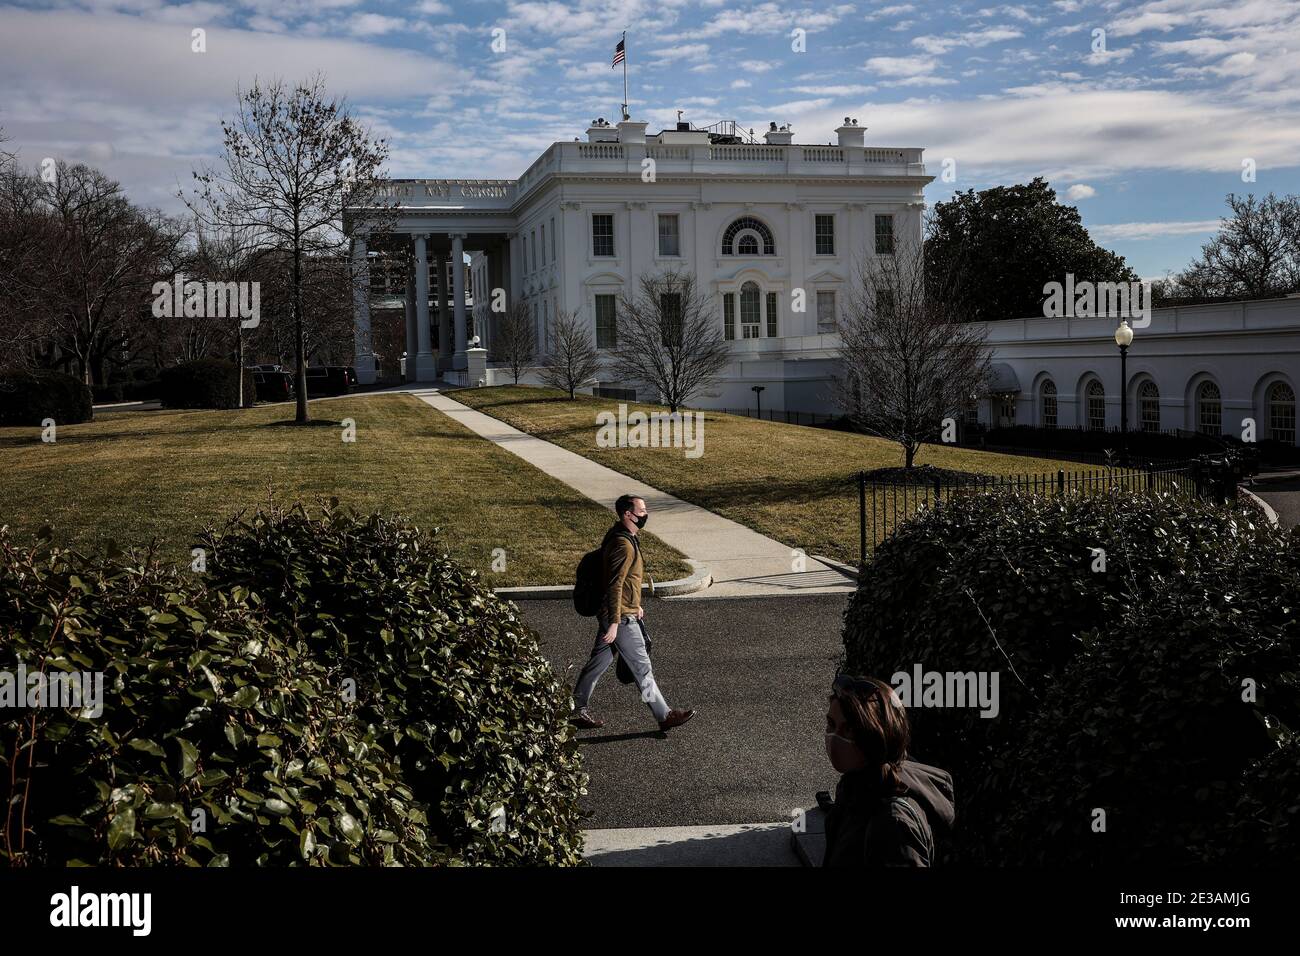 A person walks on the North Lawn of the White House on January 17, 2021 in Washington, DC., as the city prepares for the inauguration of the President elect Joe Biden.Credit: Oliver Contreras/Pool via CNP | usage worldwide Stock Photo